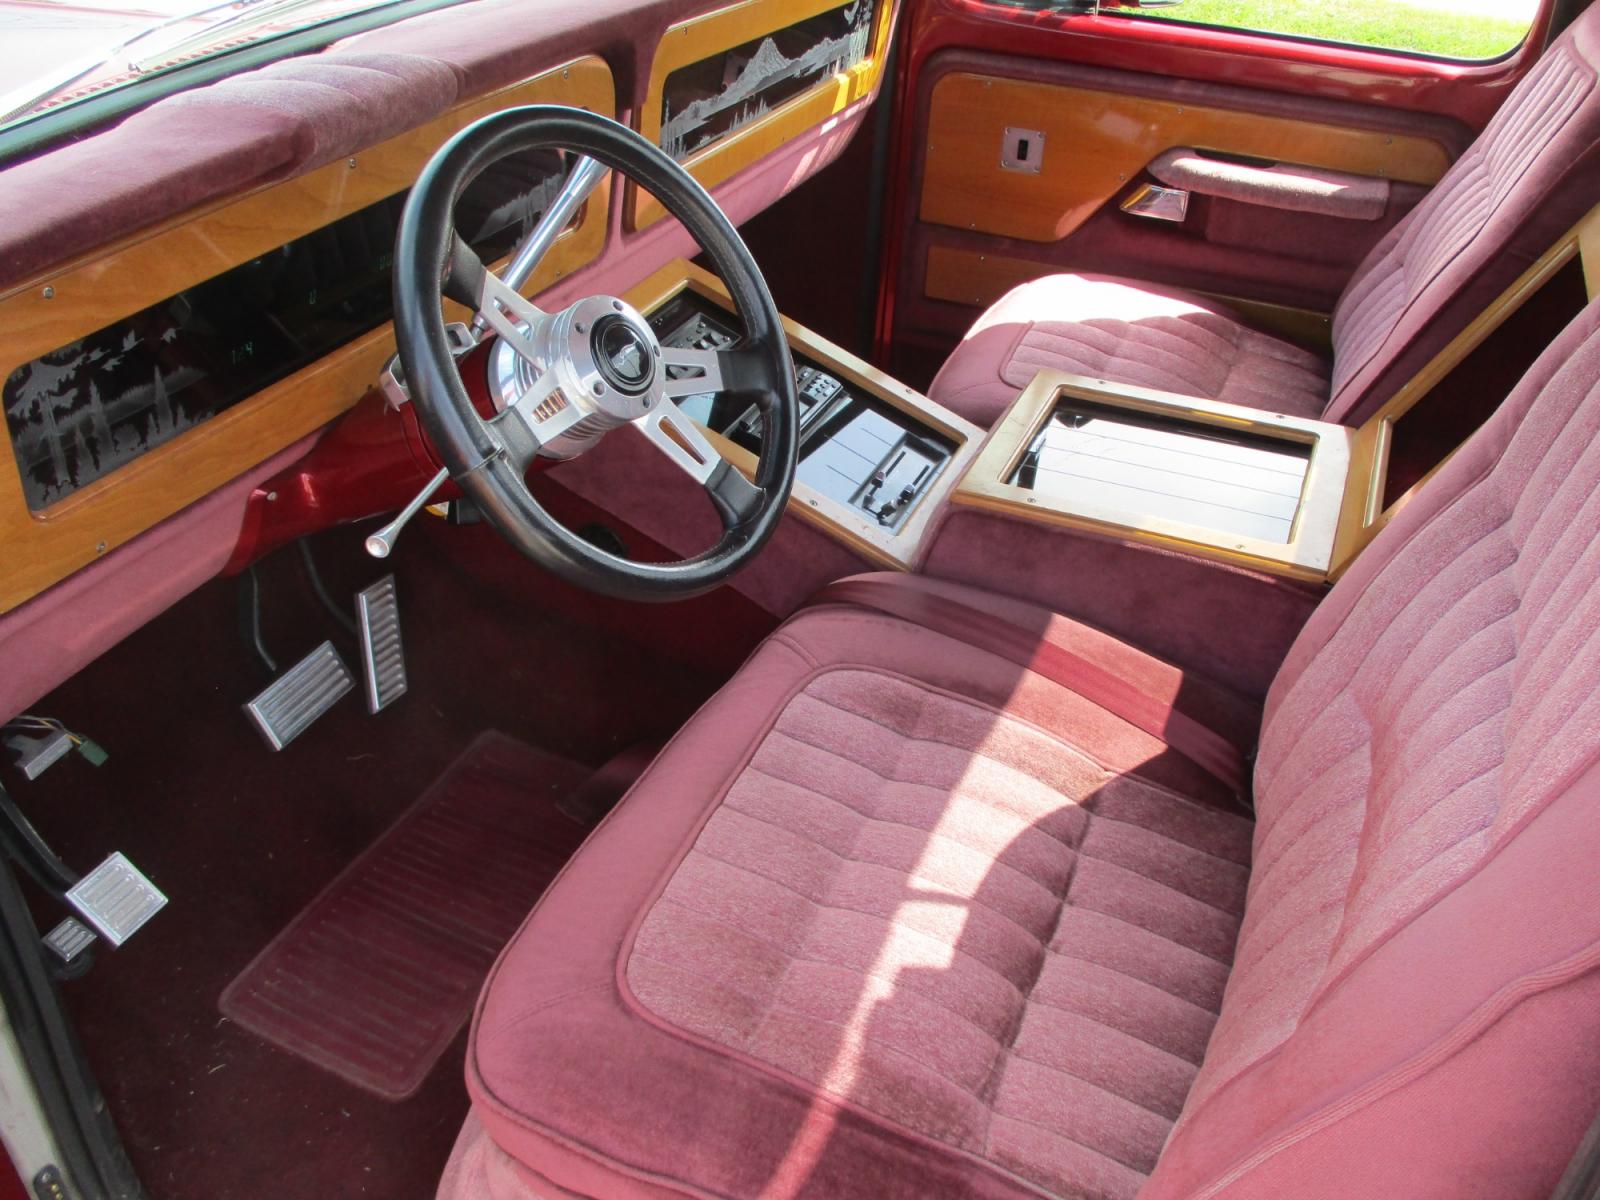 1977 /Burgundy Ford with an 351 engine, Automatic transmission, 0.000000, 0.000000 - 1977 Ford Engine: 351 Transmission: C-6 Trans. Rear End: Narrowed Ford Rear w/Tubbed Bed Interior: Hand Built Custom Interior w/Digital Dash Highlights: Ground effects, Fender Vents, Billet Grille, “92 Ford Bumper. Etched Glass, Digital Dash., Tilt Wheel, Center Cut Hood. Polished Stainless - Photo #8